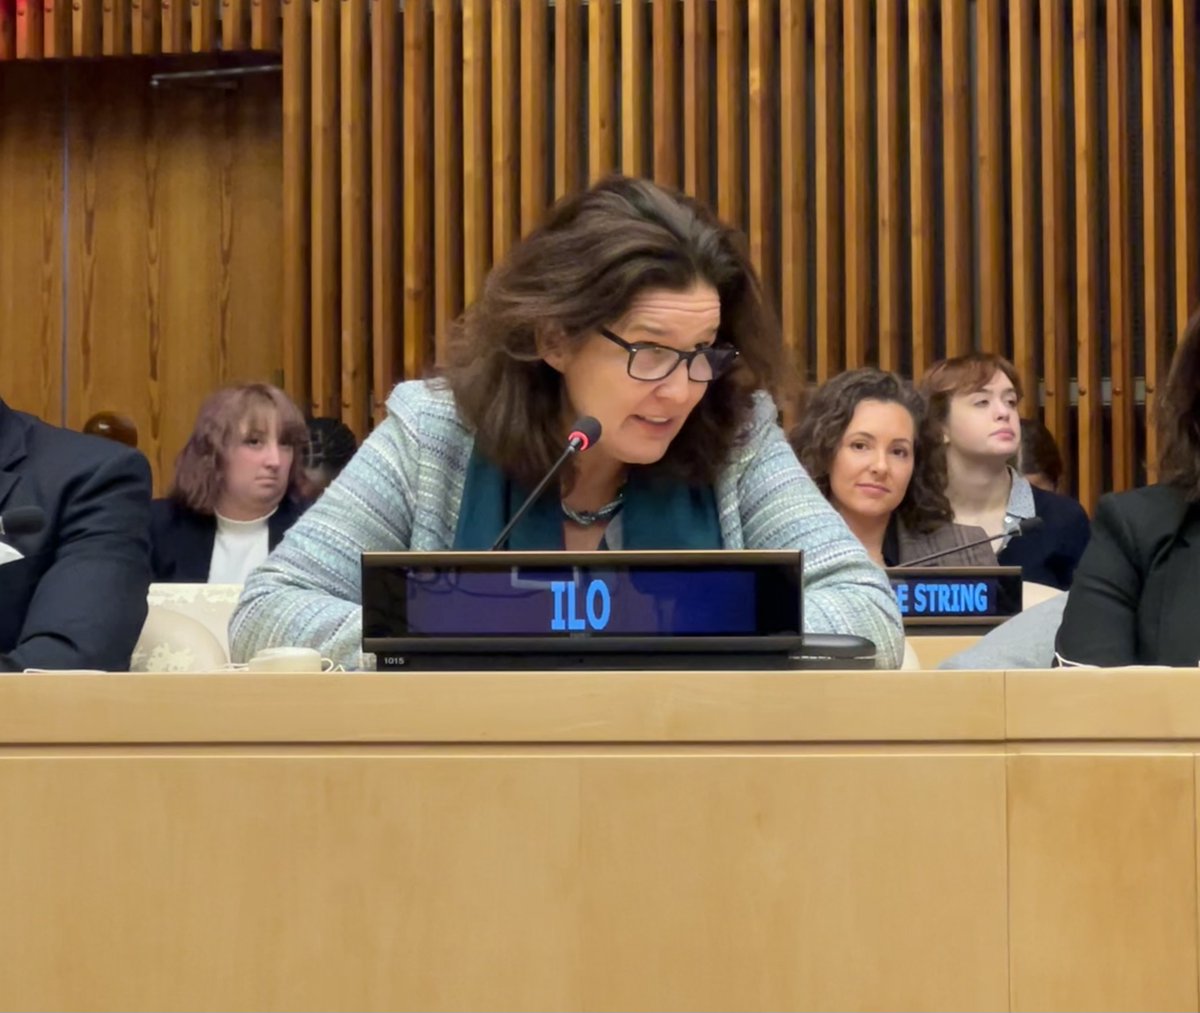 'The @ILO_NewYork is a proud partner of the @WomenScienceDay & this global movement. It is wonderful to see so many young people in this room and hopefully your voice will be heard in this conversation.' A small part of the Conversation 3 closing remarks, given by @BeateAndrees.